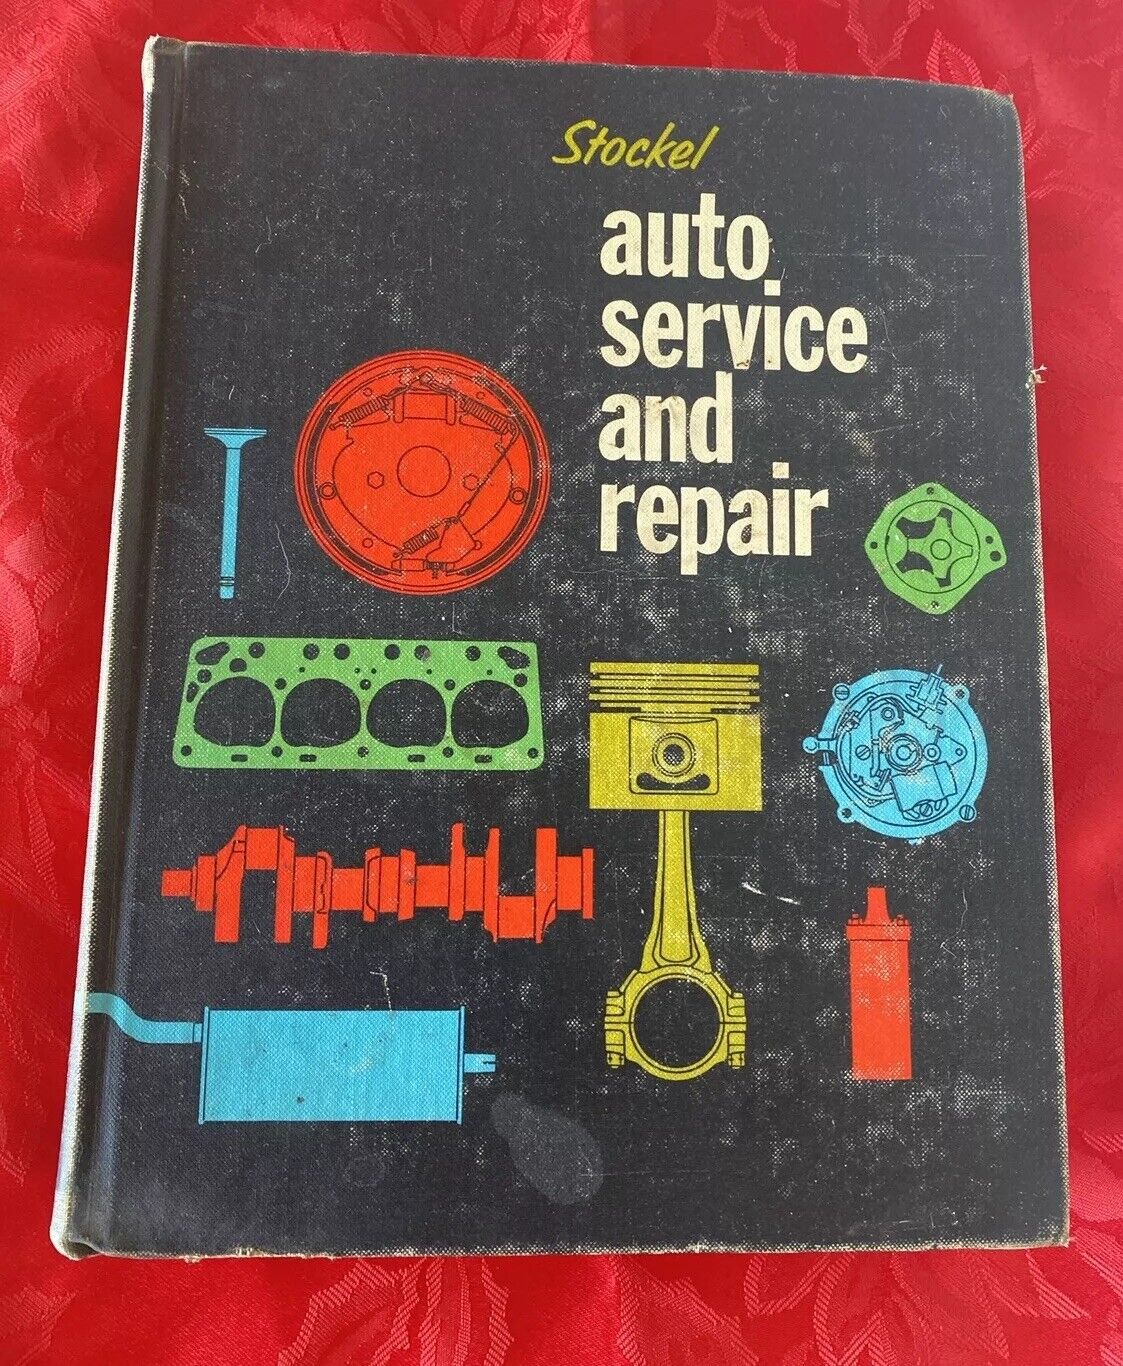 VTG STOCKEL AUTO SERVICE & REPAIR MANUAL-BASIC KNOW HOW-All MAKES, MODELS 1969